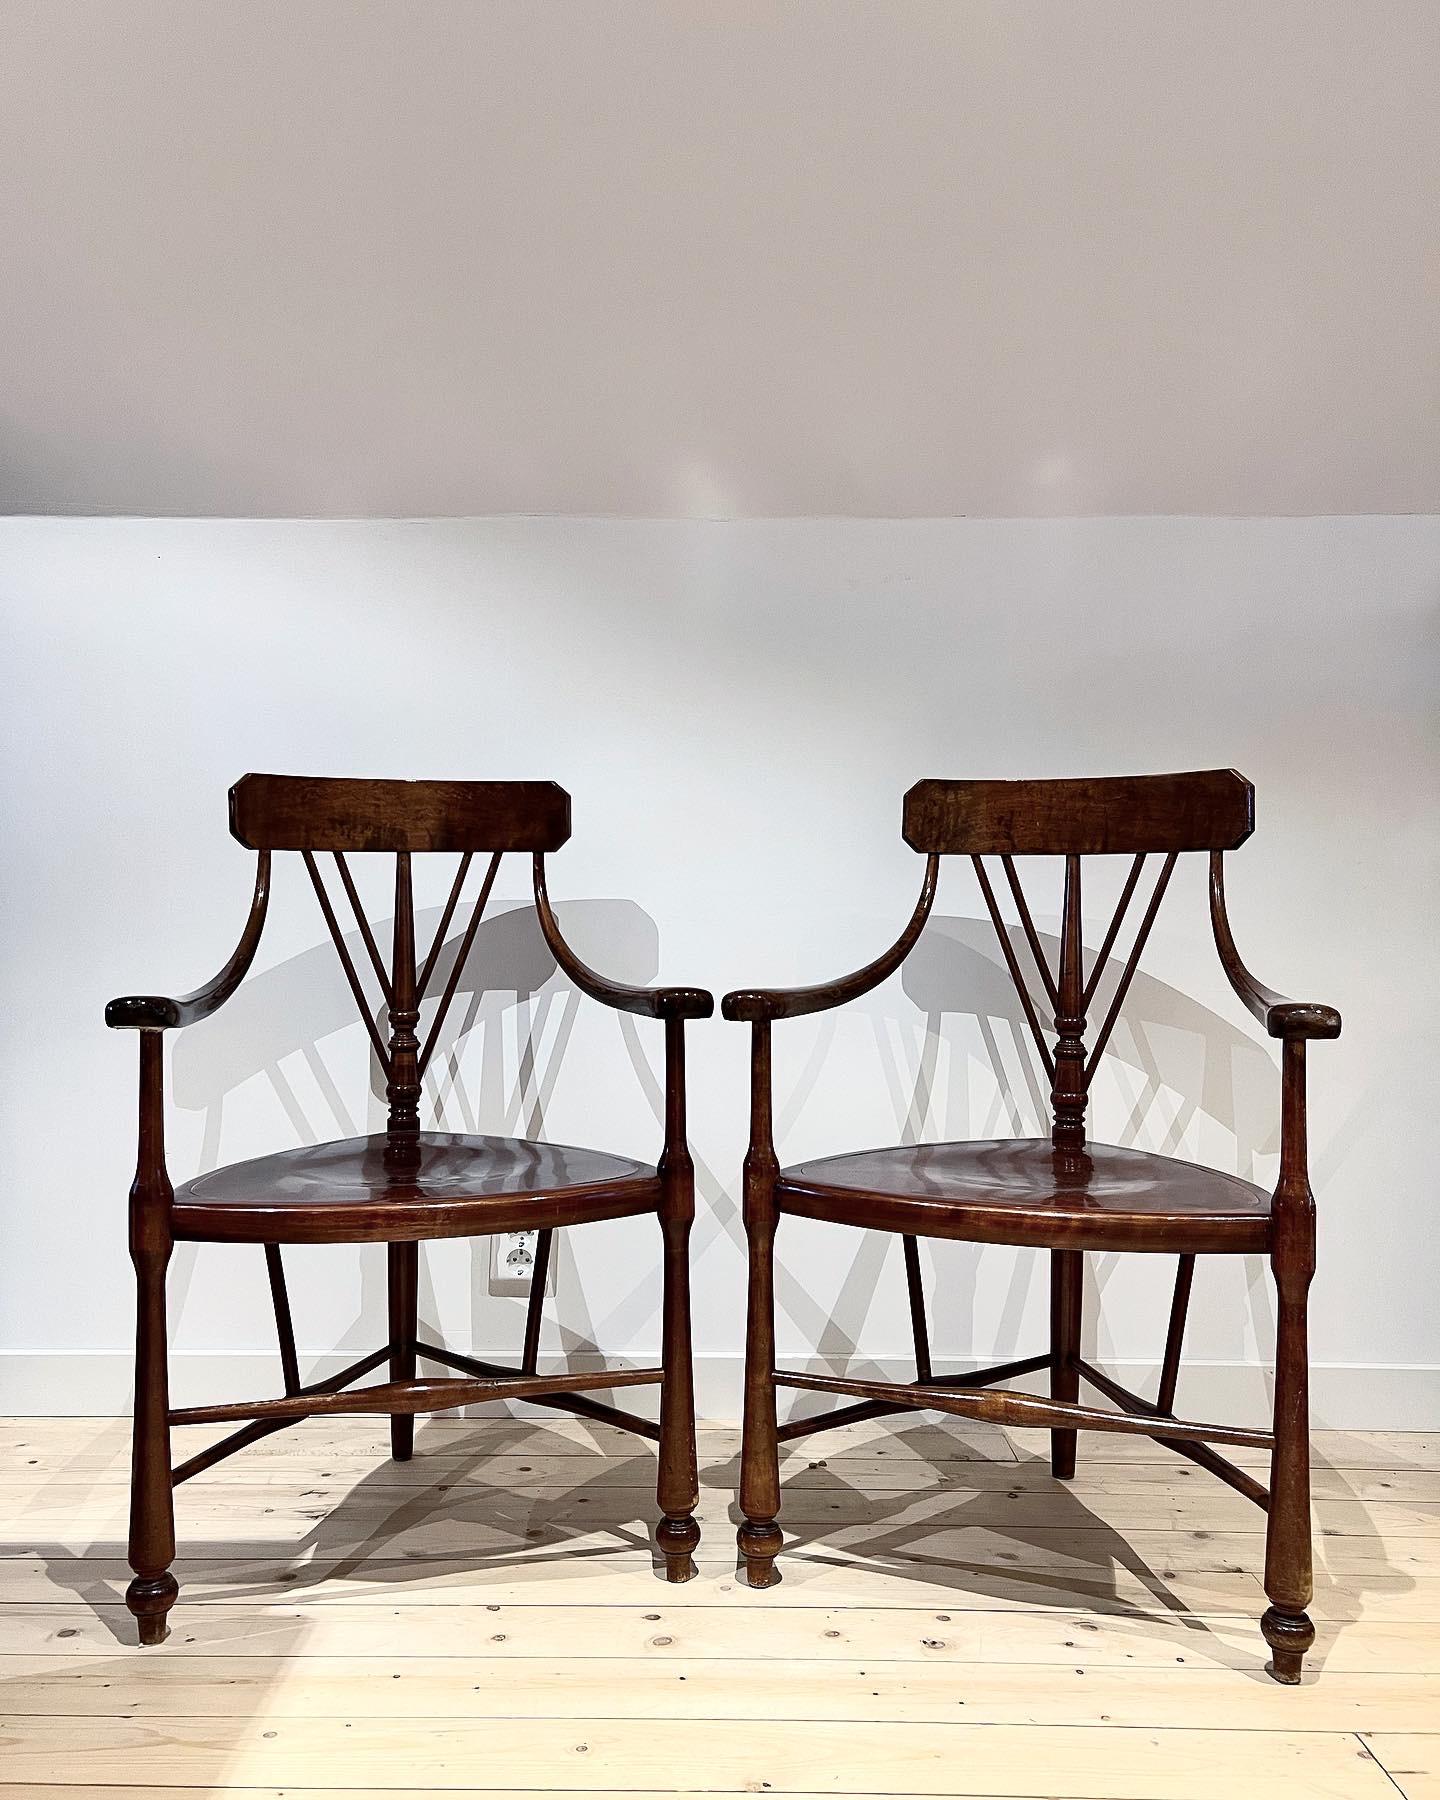 A pair of amazing and rare Windsor-type chairs in stained oak, early 20th Century.
Provenance - Merlo Castle just outside Sundsvall in Sweden. 
Beautiful sculptural shape, unusual model. 

Merlo was bought in 1872 by Fredrik Bünsow (you may